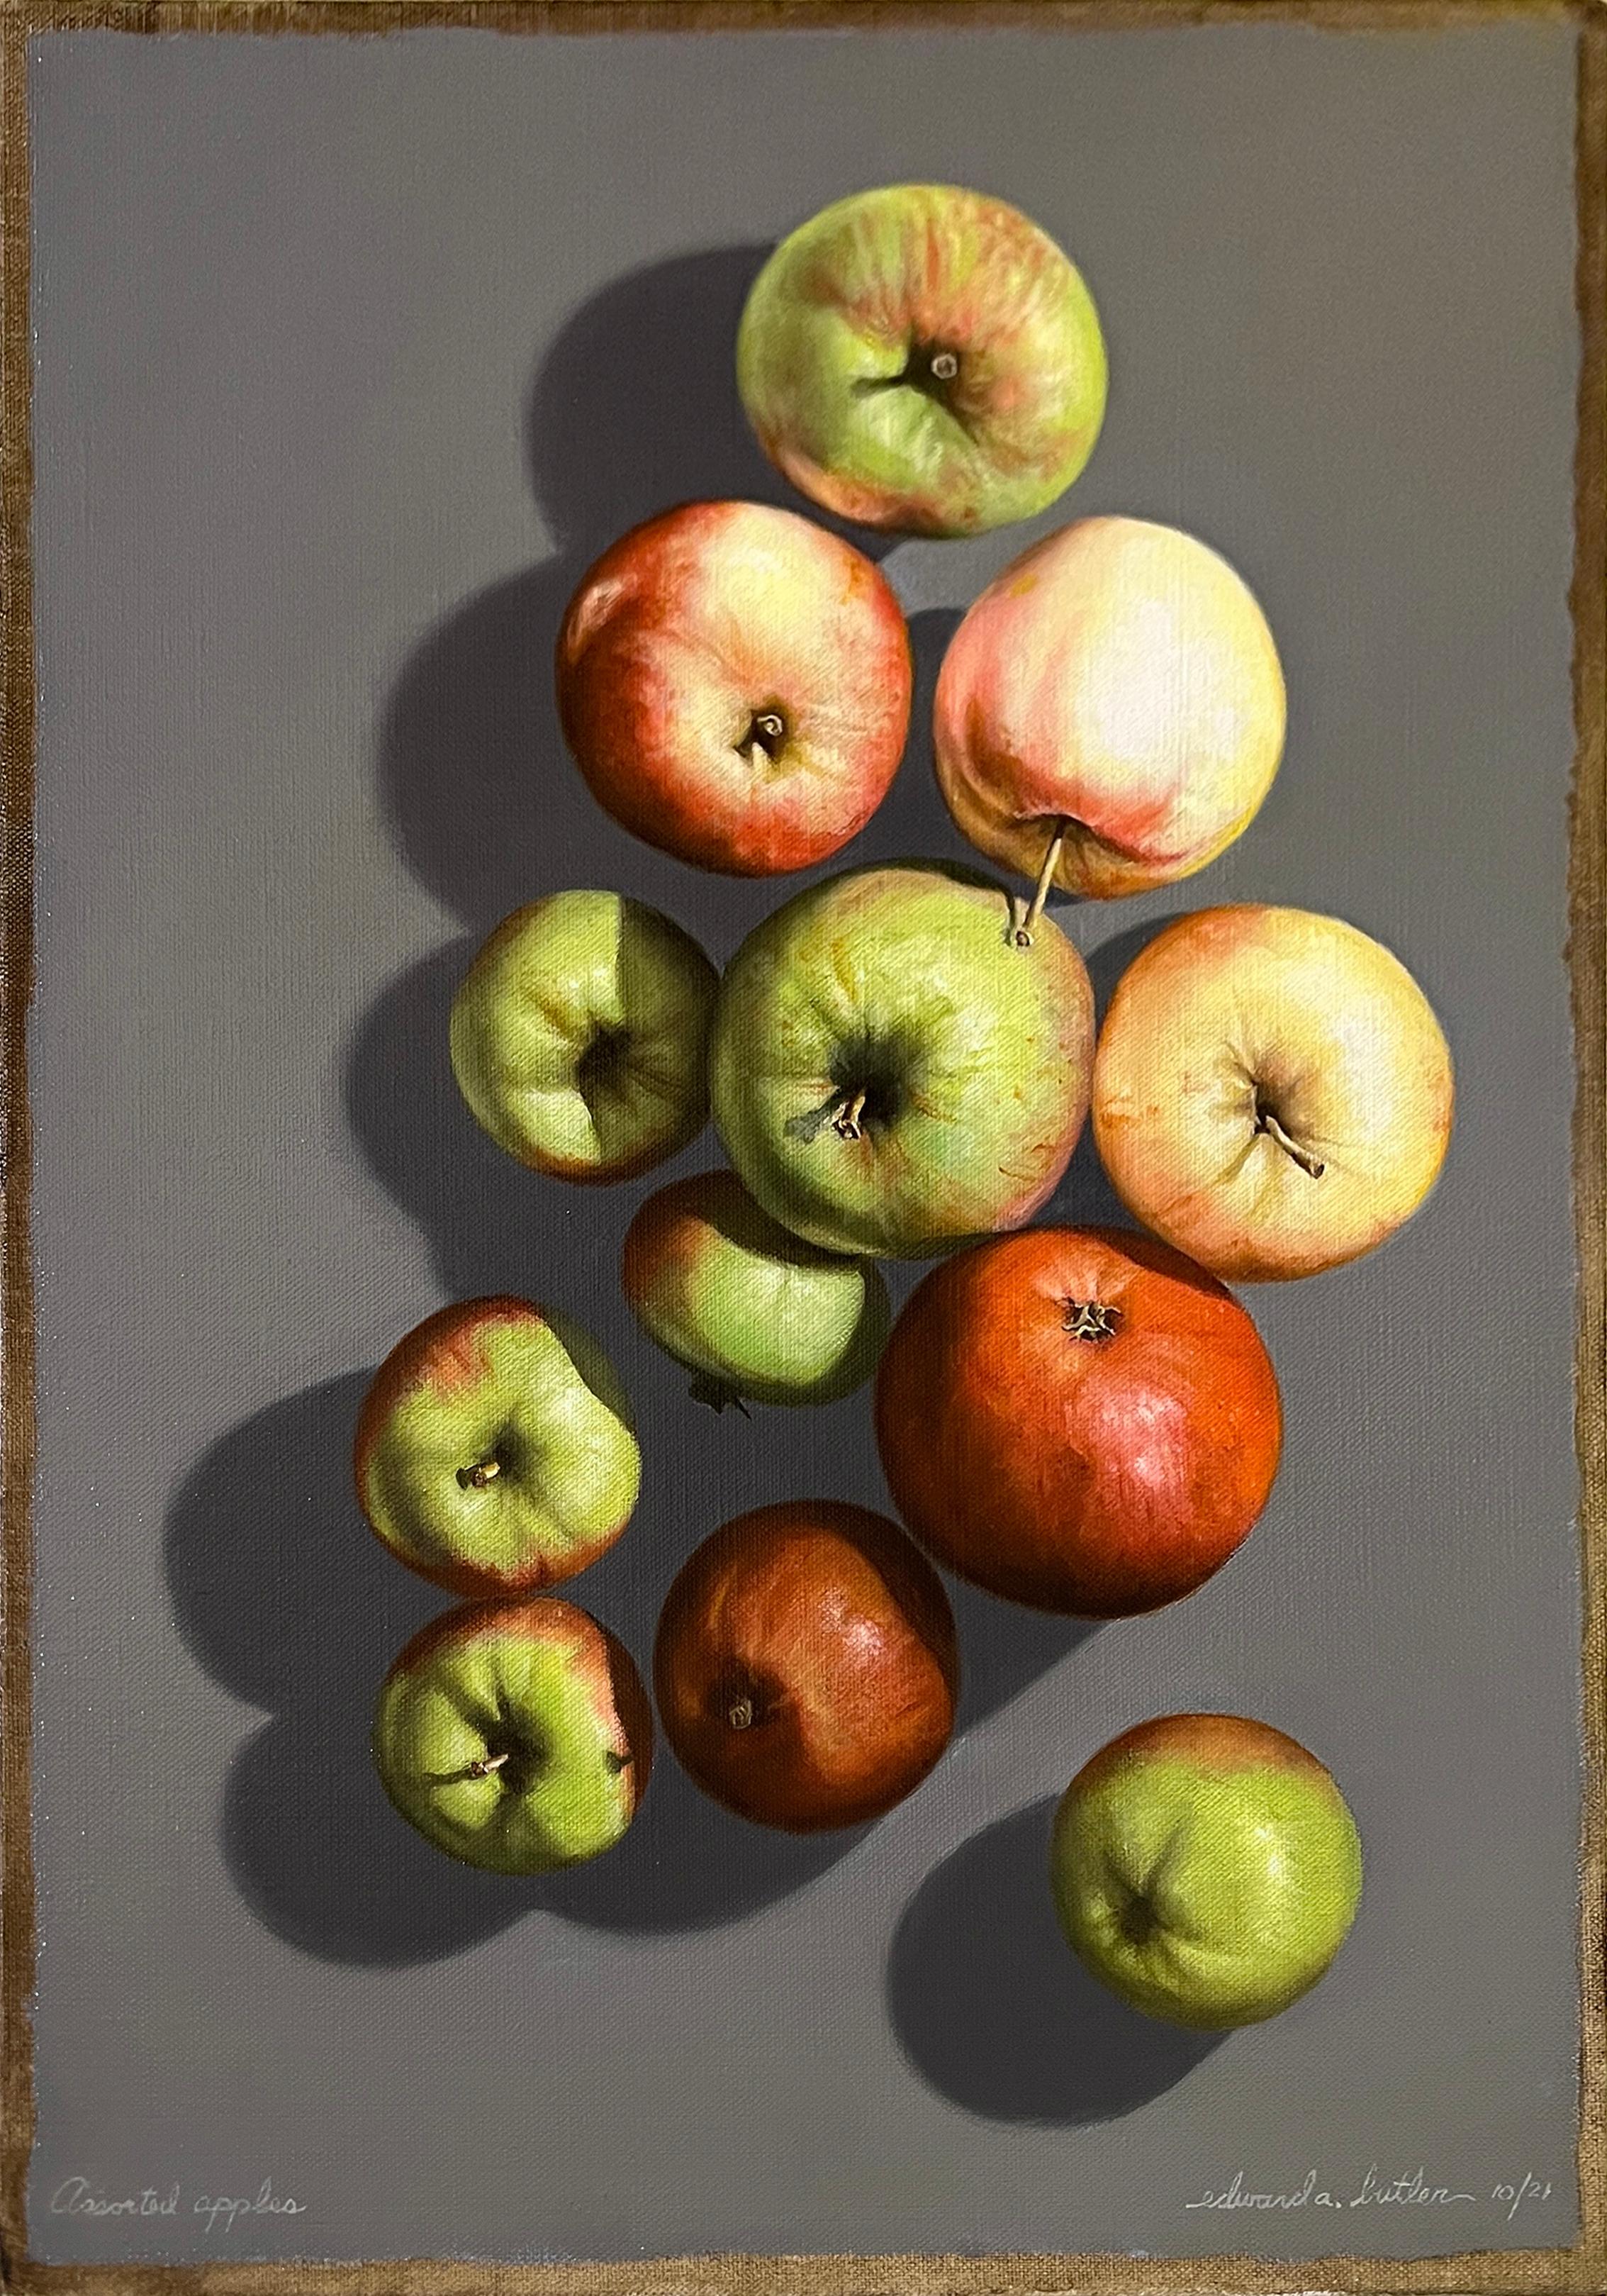 Edward A. Butler Still-Life Painting - ASSORTED APPLES - Contemporary Still Life / Realism / Photorealism